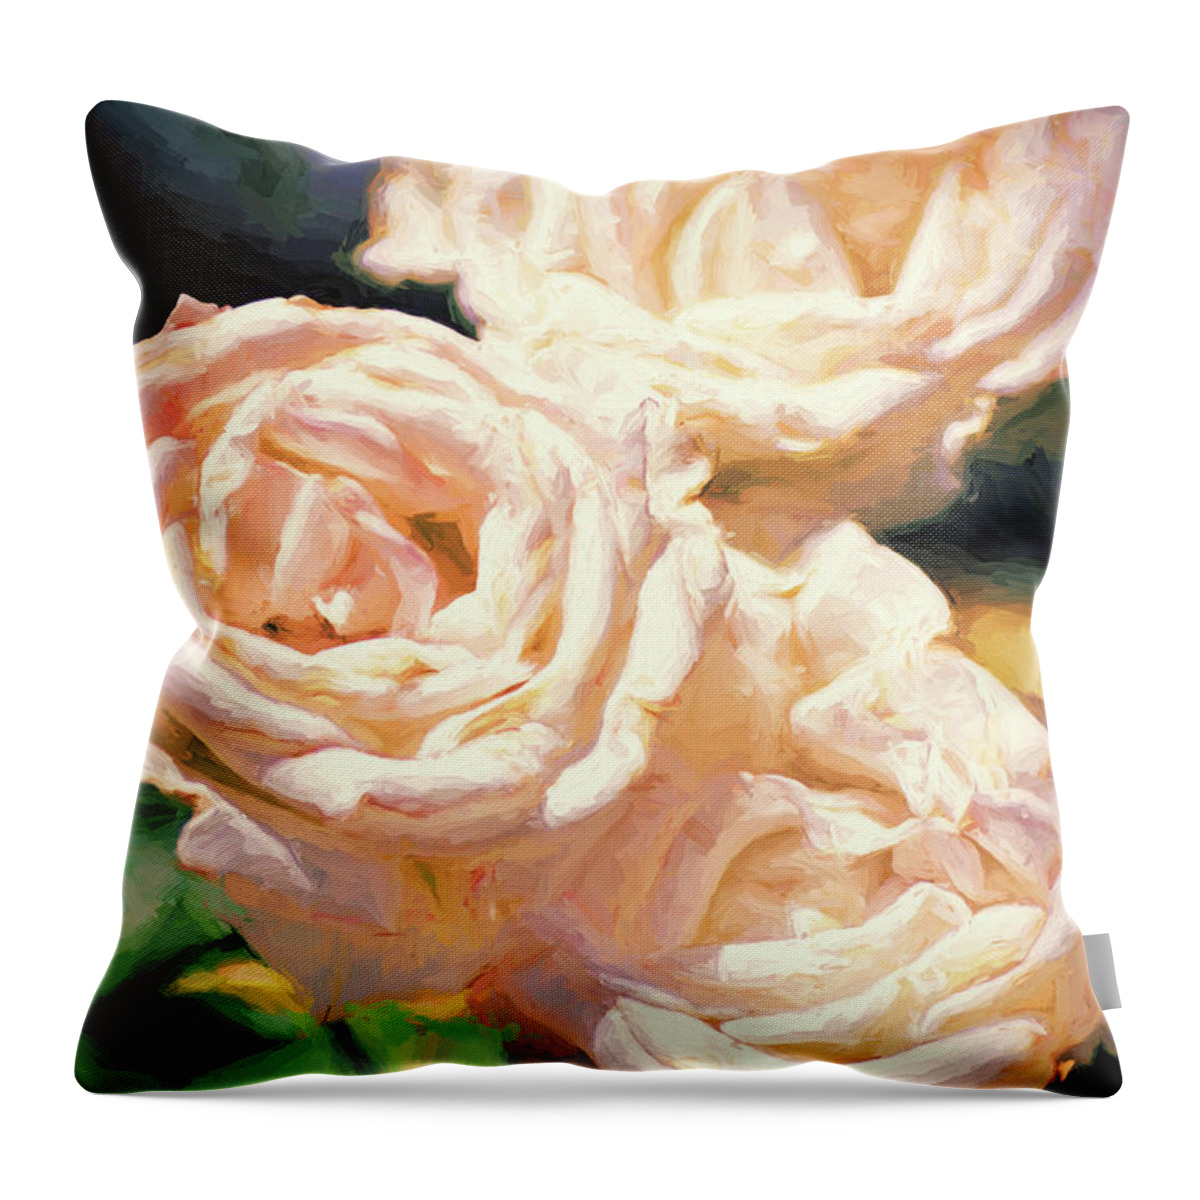 Floral Throw Pillow featuring the photograph Rose 261 by Pamela Cooper